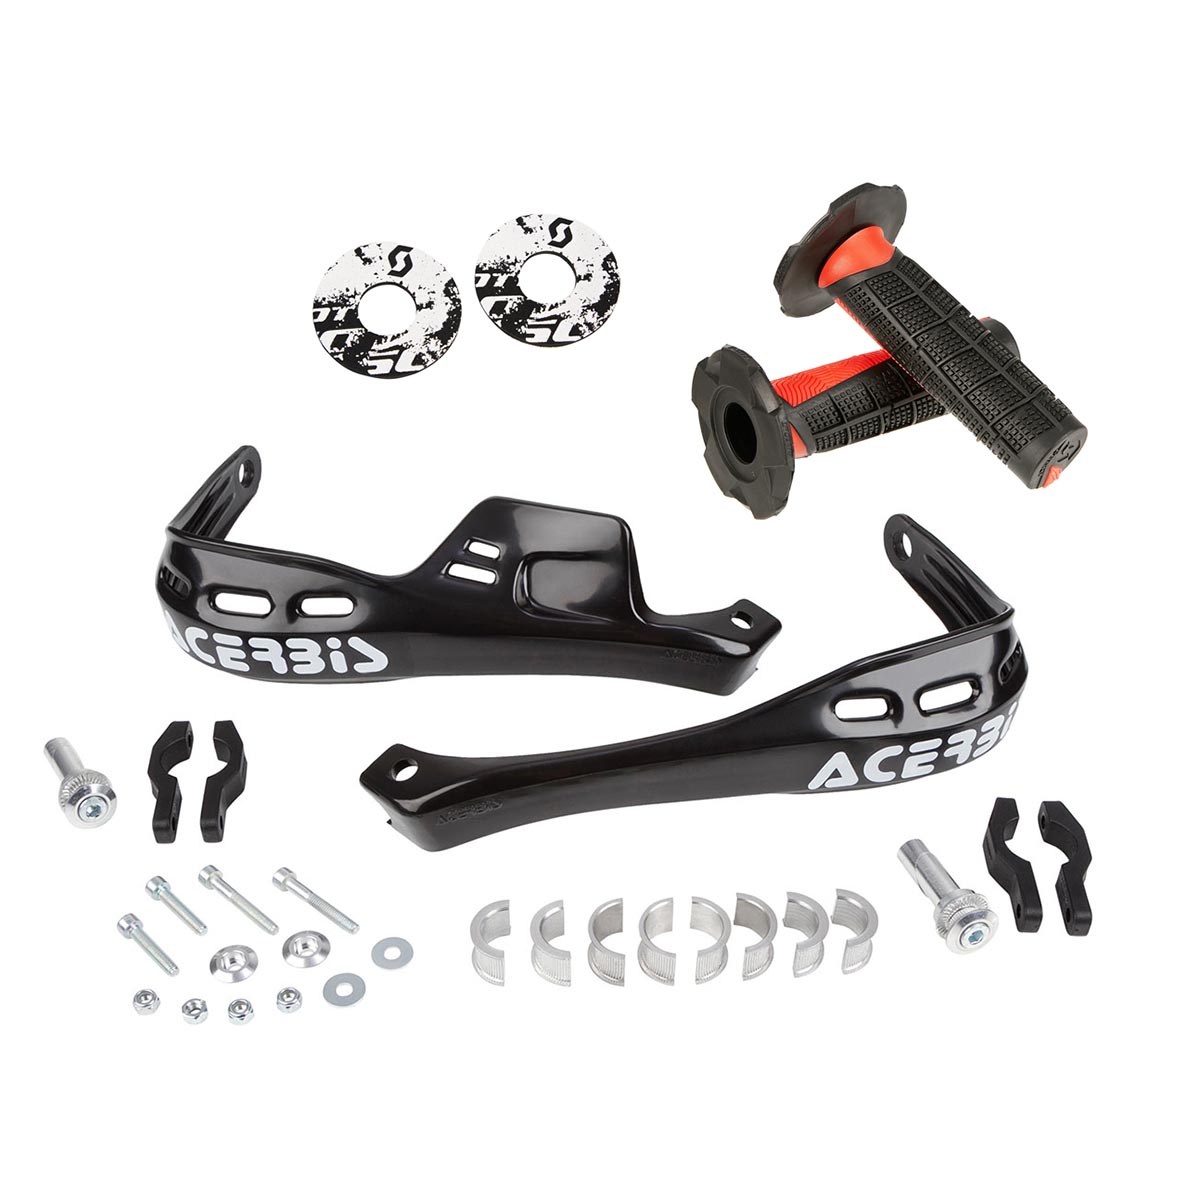 Acerbis Paramani Rally Brush Incl. Scott Grip and donuts